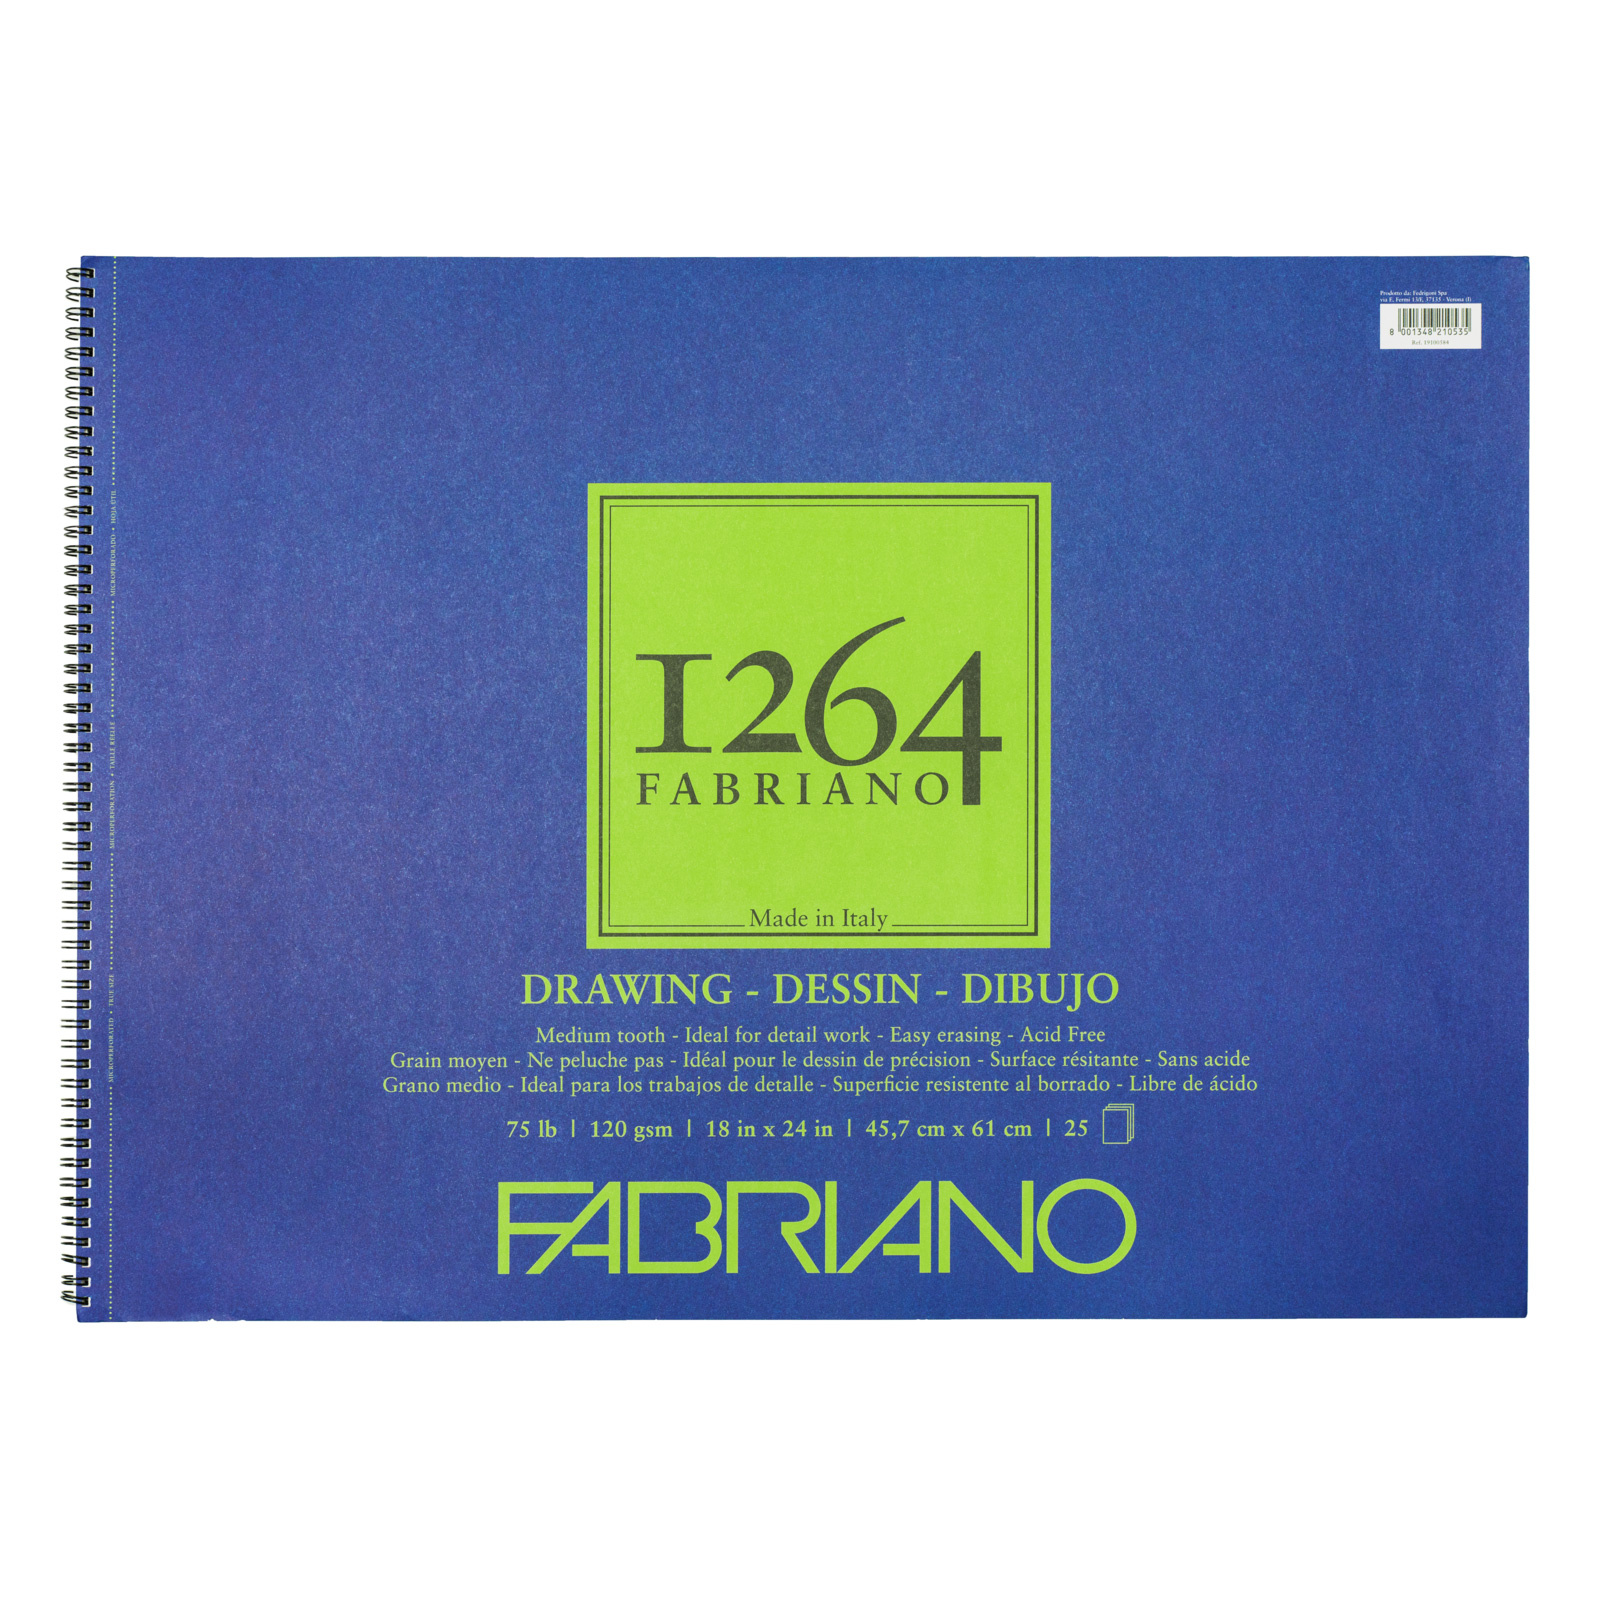 Fabriano 1264 Drawing Pads, 18" x 24"